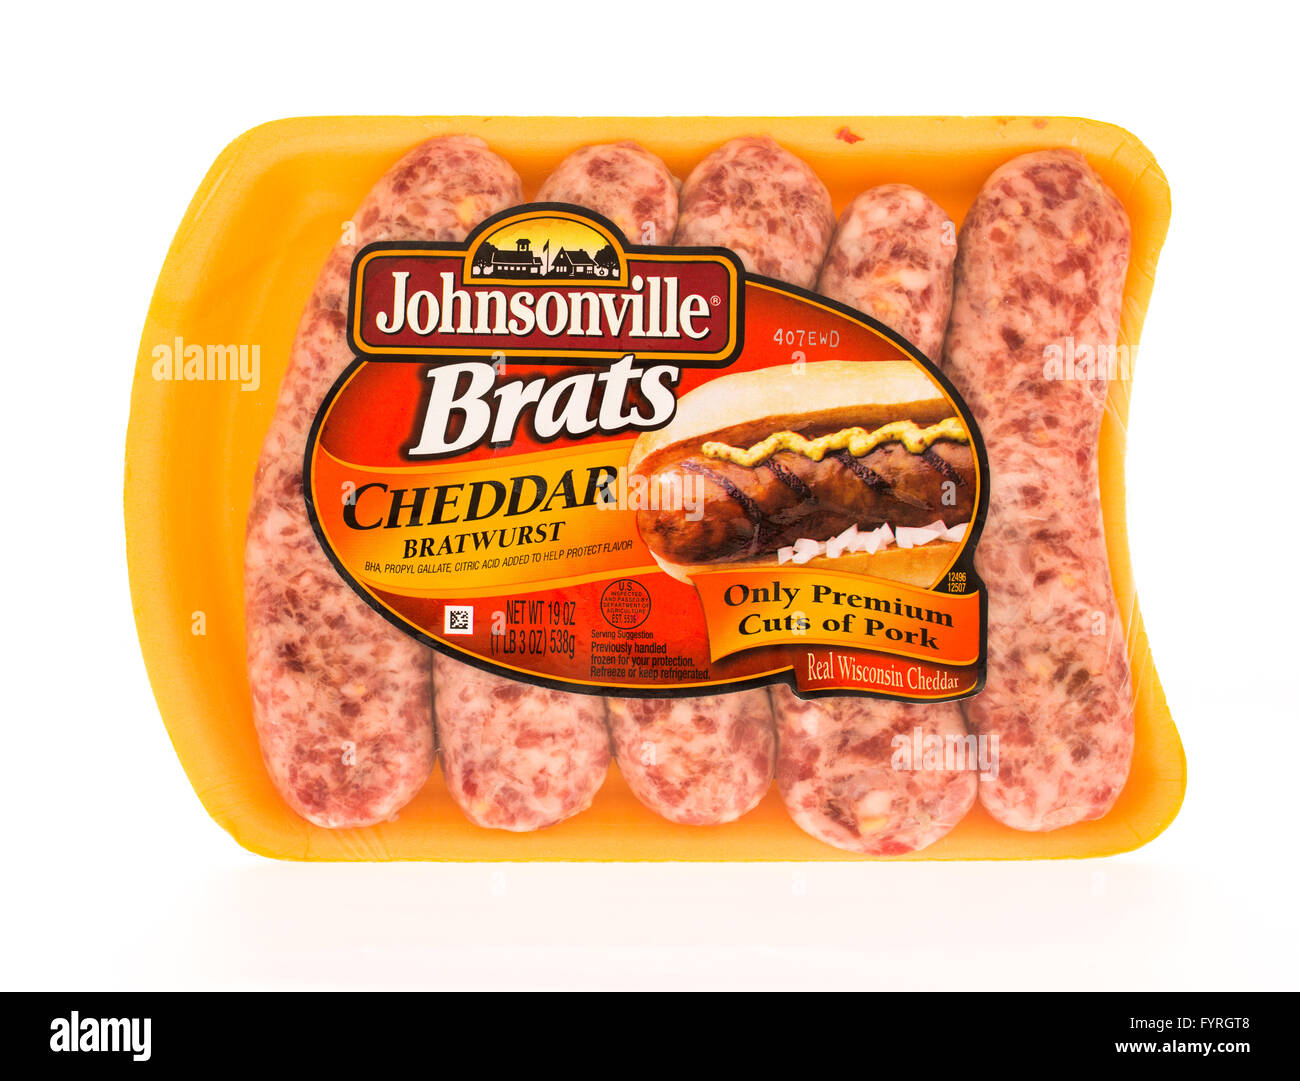 Winneconni, WI - 23 June 2015:  Package of Johnsonville brats in cheddar flavor. Stock Photo